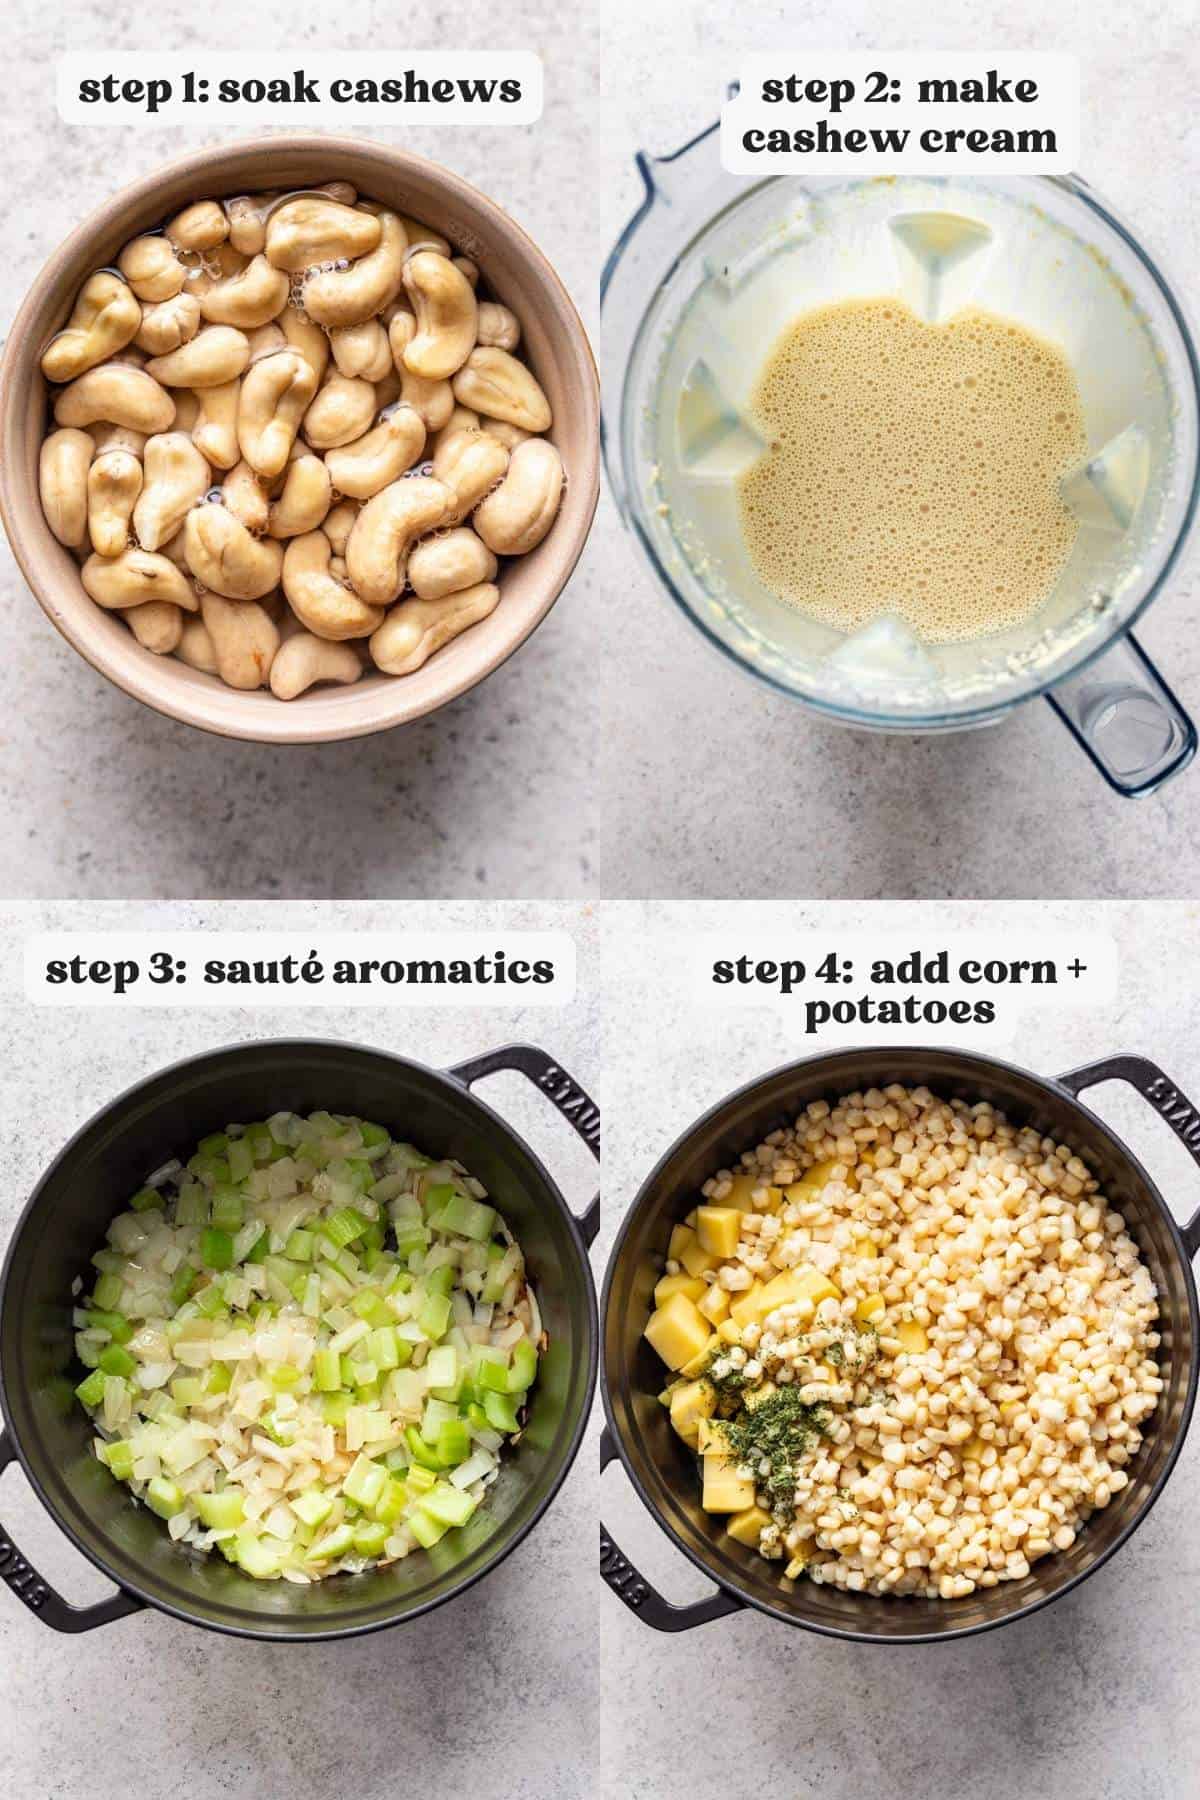 Step by step instructions of how to make chowder. 4 images showing the process.